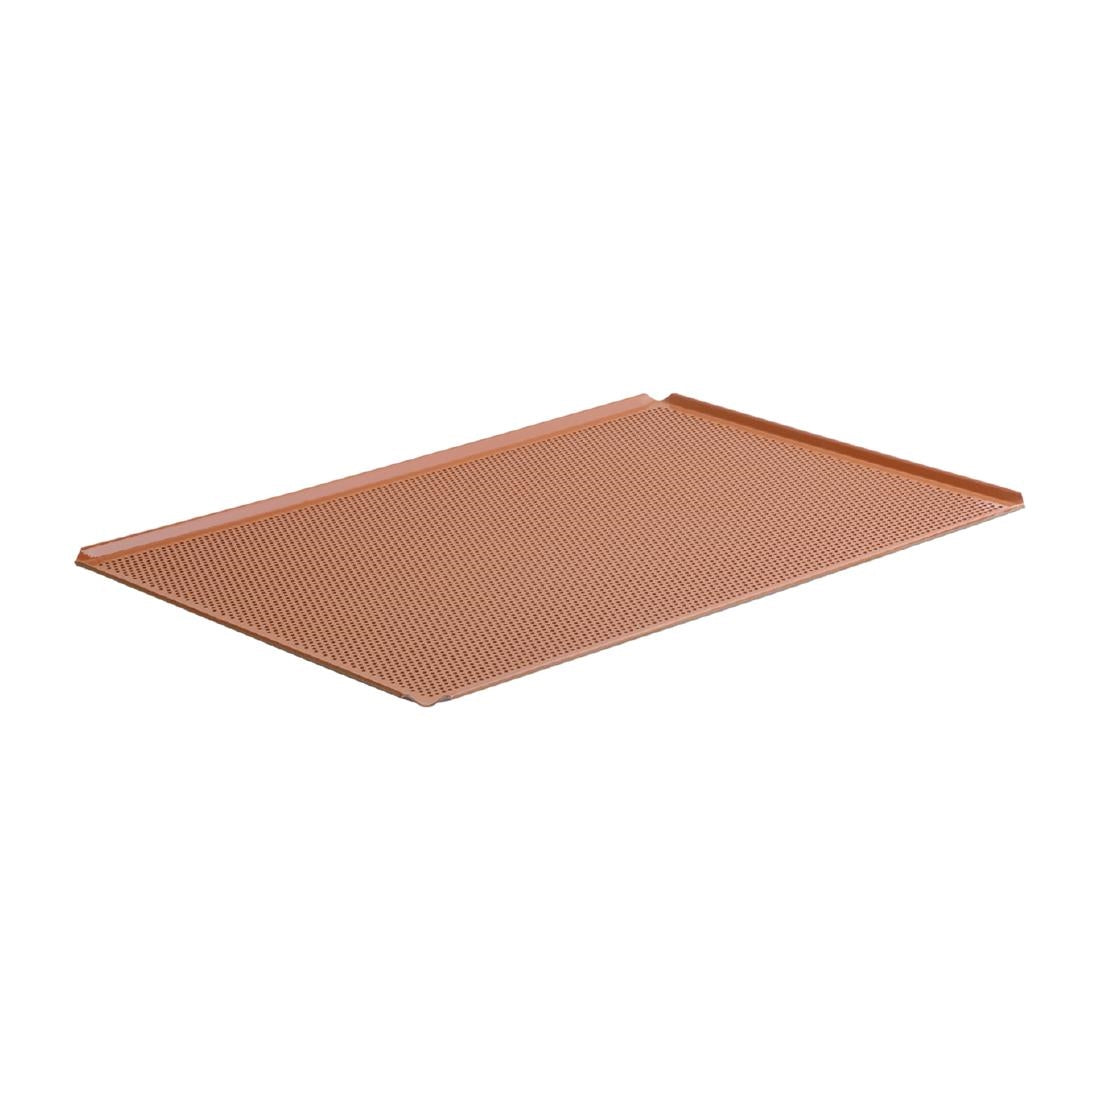 CW321 Schneider Non-Stick Perforated Baking Tray 530 x 325mm JD Catering Equipment Solutions Ltd